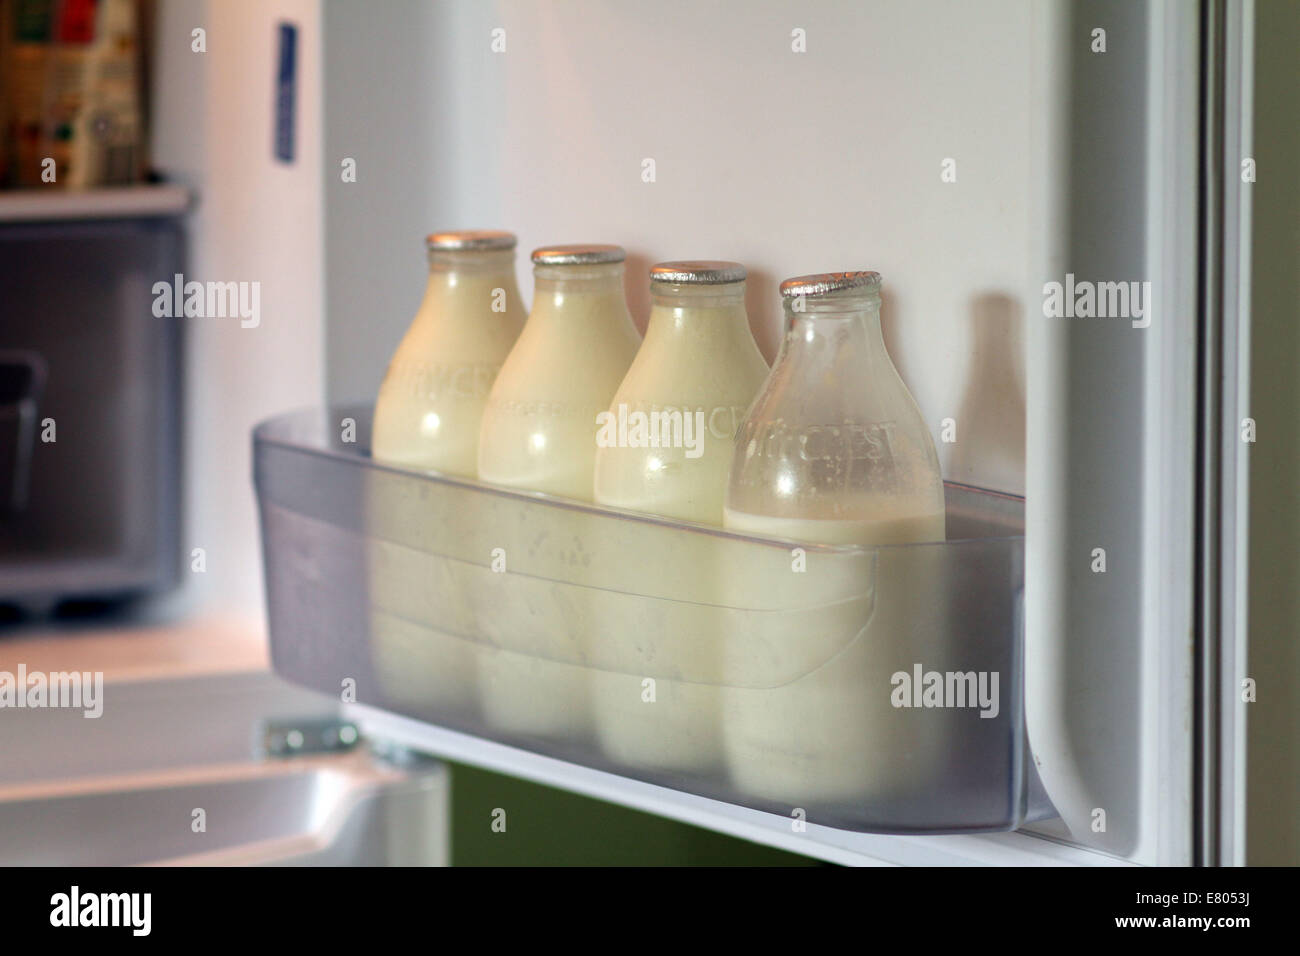 Dairy Crest milk bottles . . Peterborough, Cambridgeshire, UK . . 26.09.2014 Dairy Crest bottles of milk, as it is reported that Dairy Crest are stopping the manufacturing of glass milk bottles. Pic: Paul Marriott Photography Stock Photo